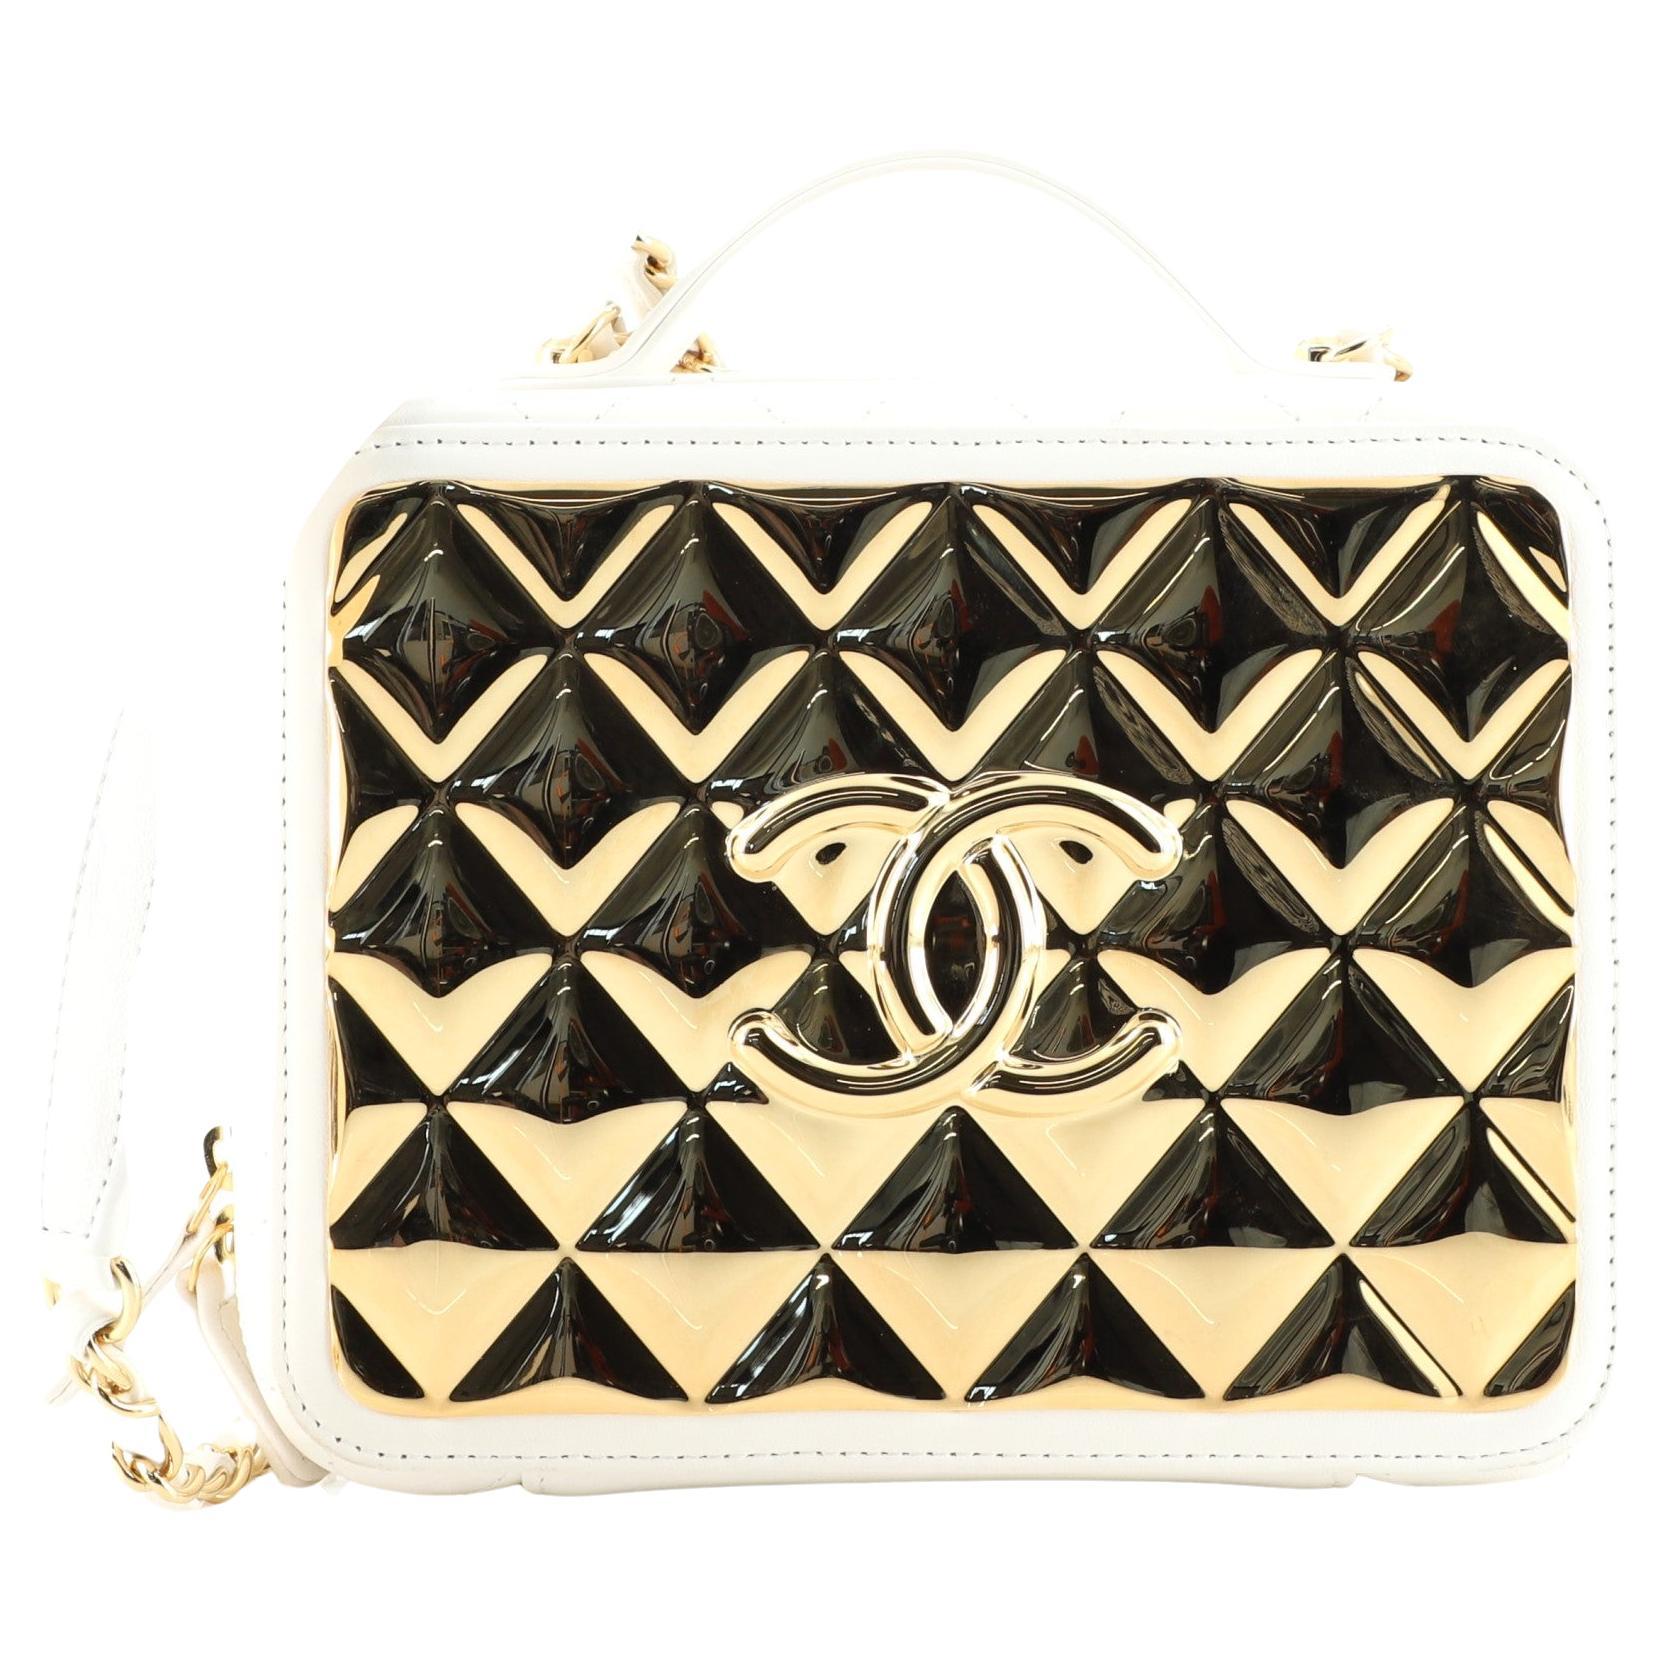 Chanel Lambskin Quilted Golden Plate Clutch with Chain Black